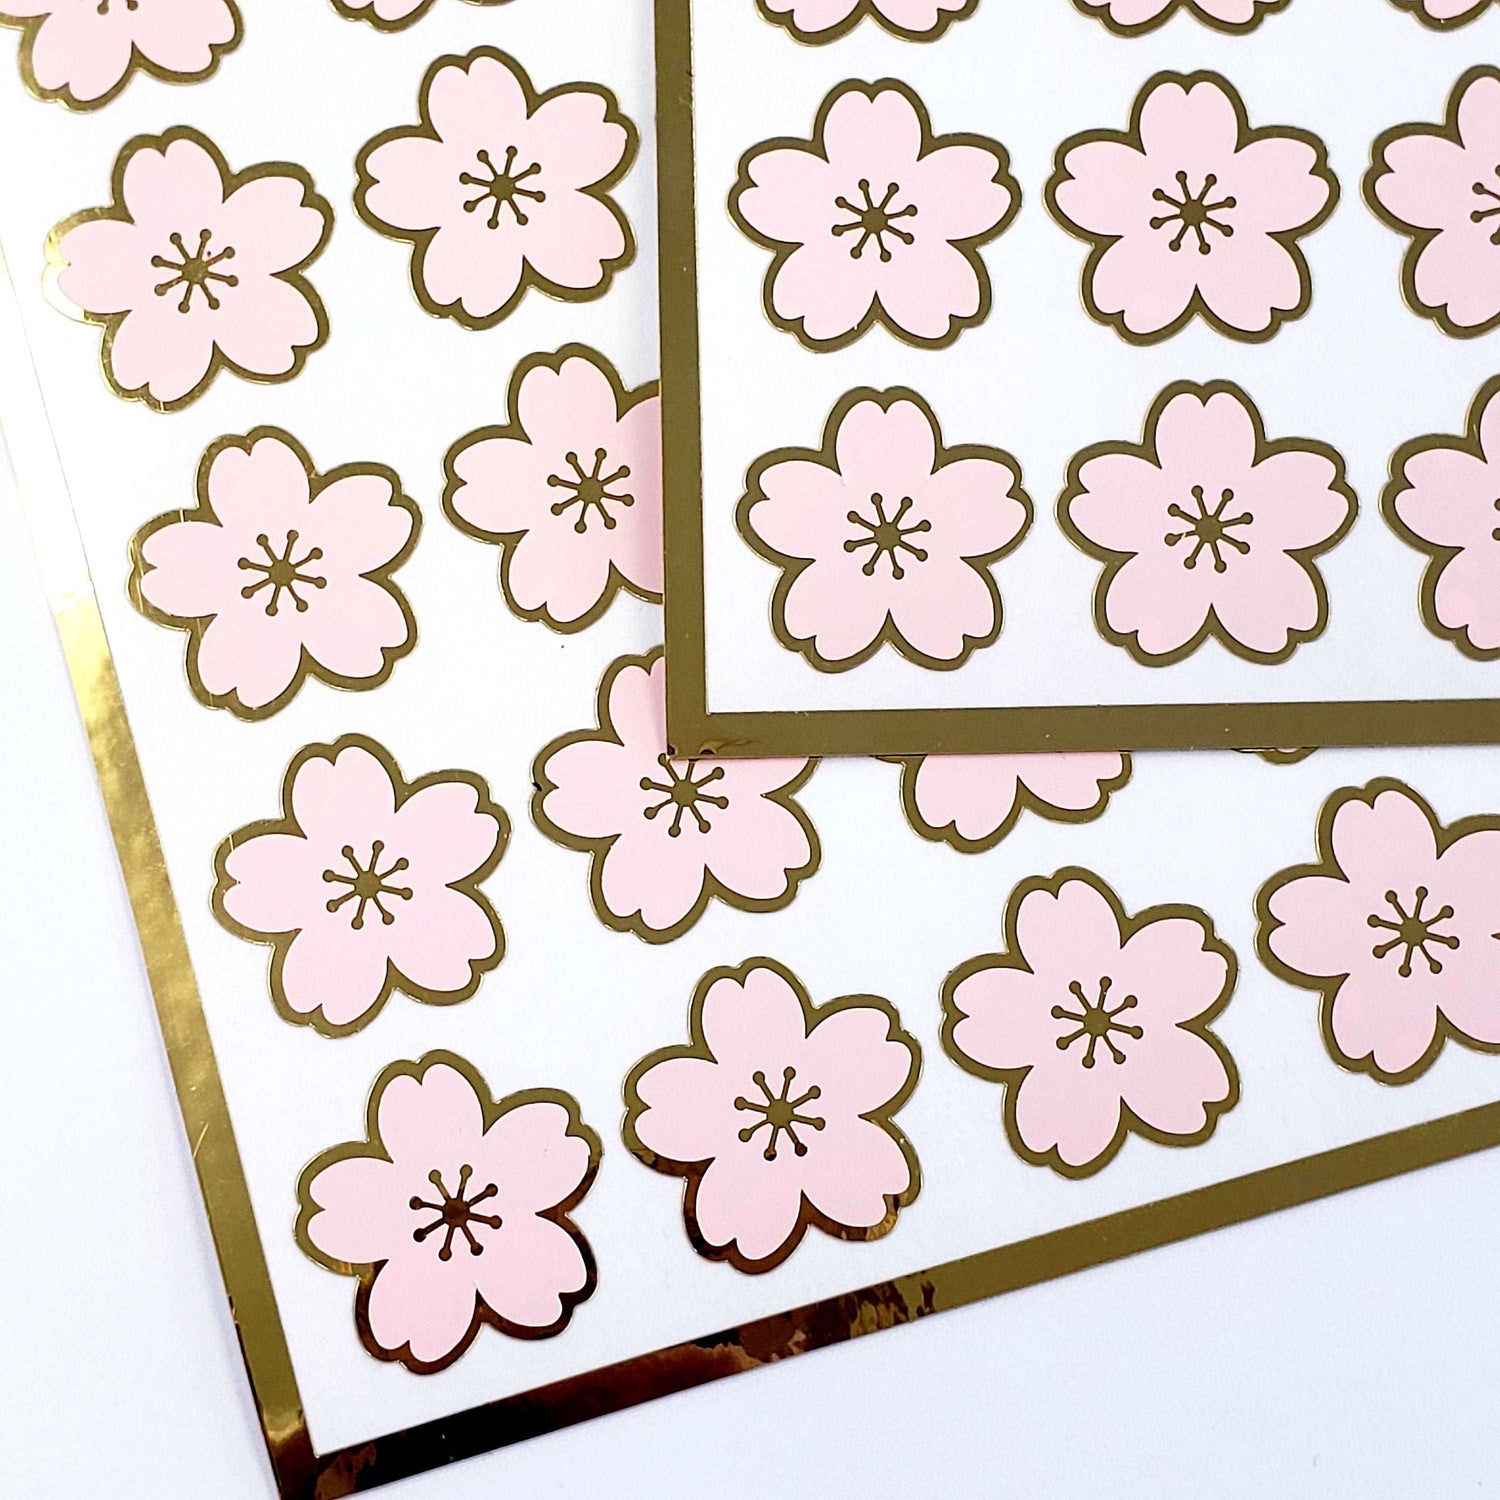 Sakura Flower Stickers, set of 35 blush pink and gold cherry blossom stickers for spring weddings, Mother's day gift and scrapbook pages.